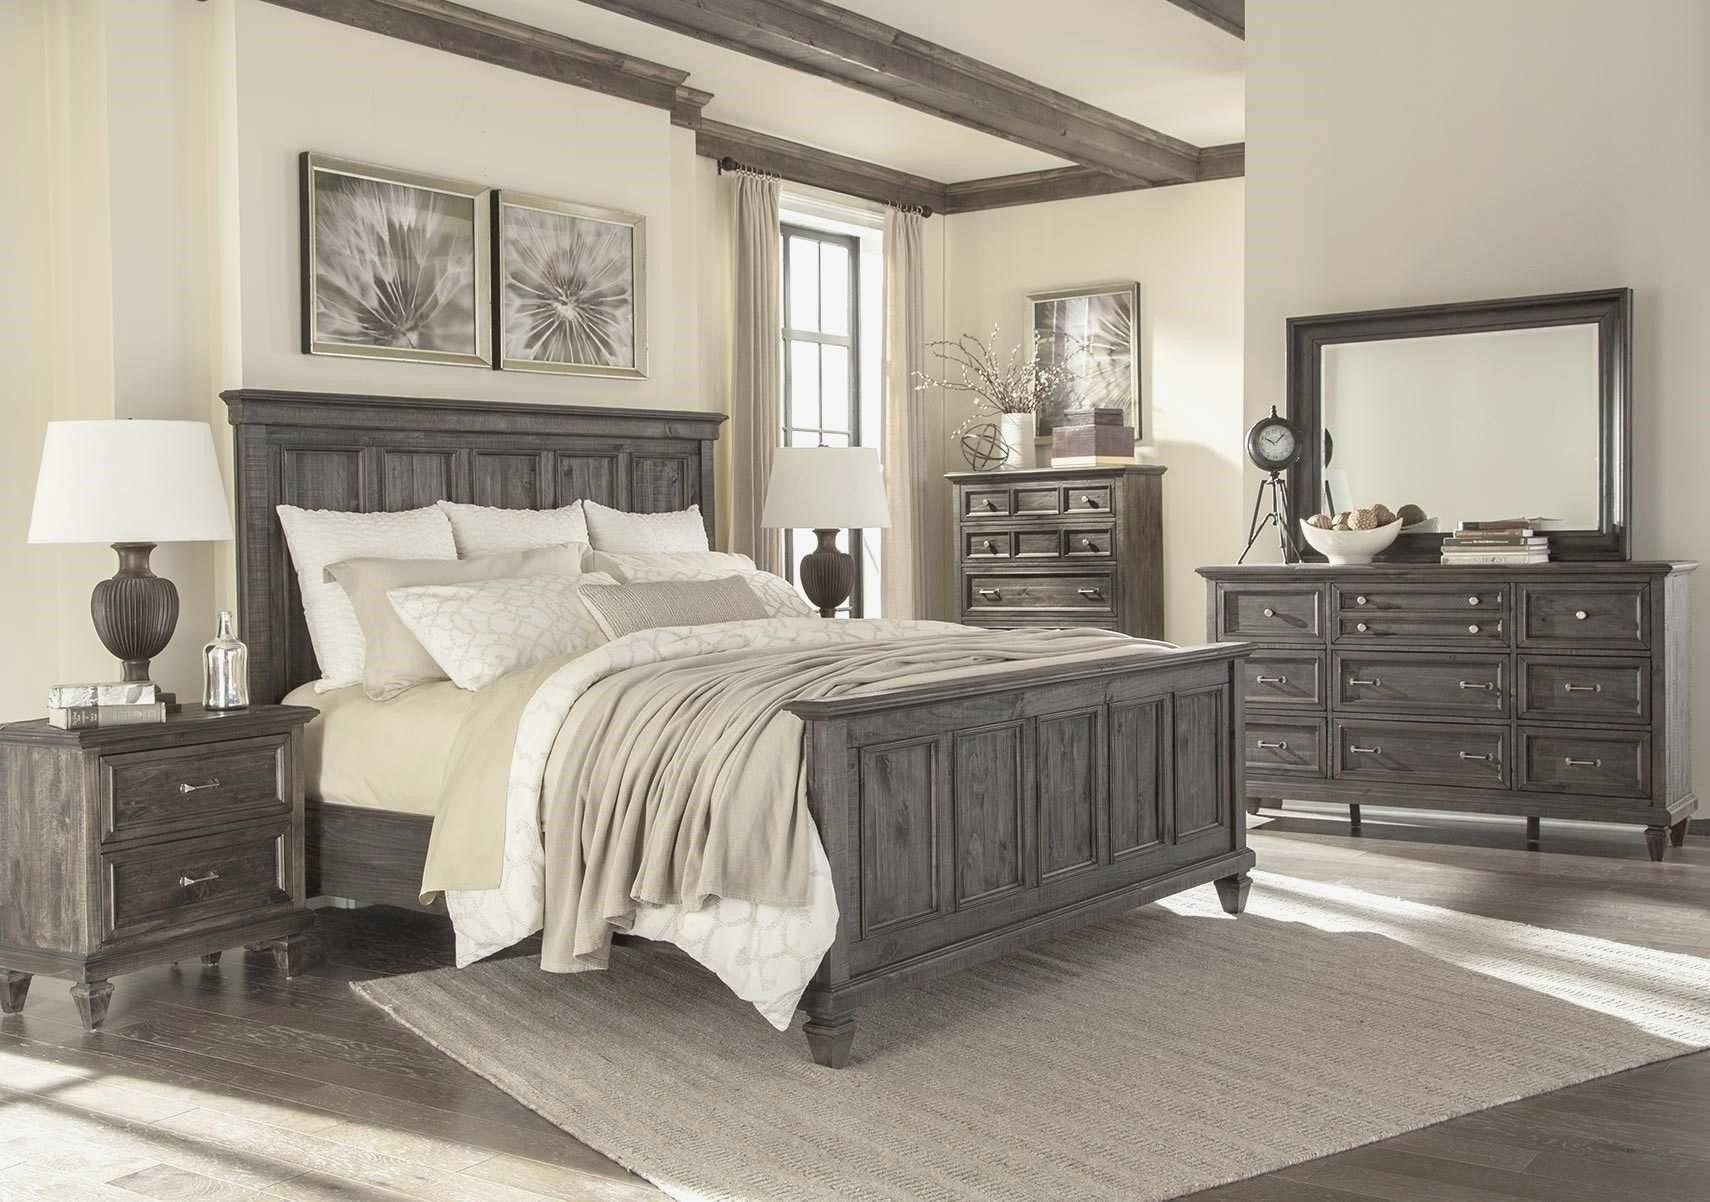 Extraordinary Lacks Bedroom Furniture Bedrooms Amazing Sets King within sizing 1710 X 1202